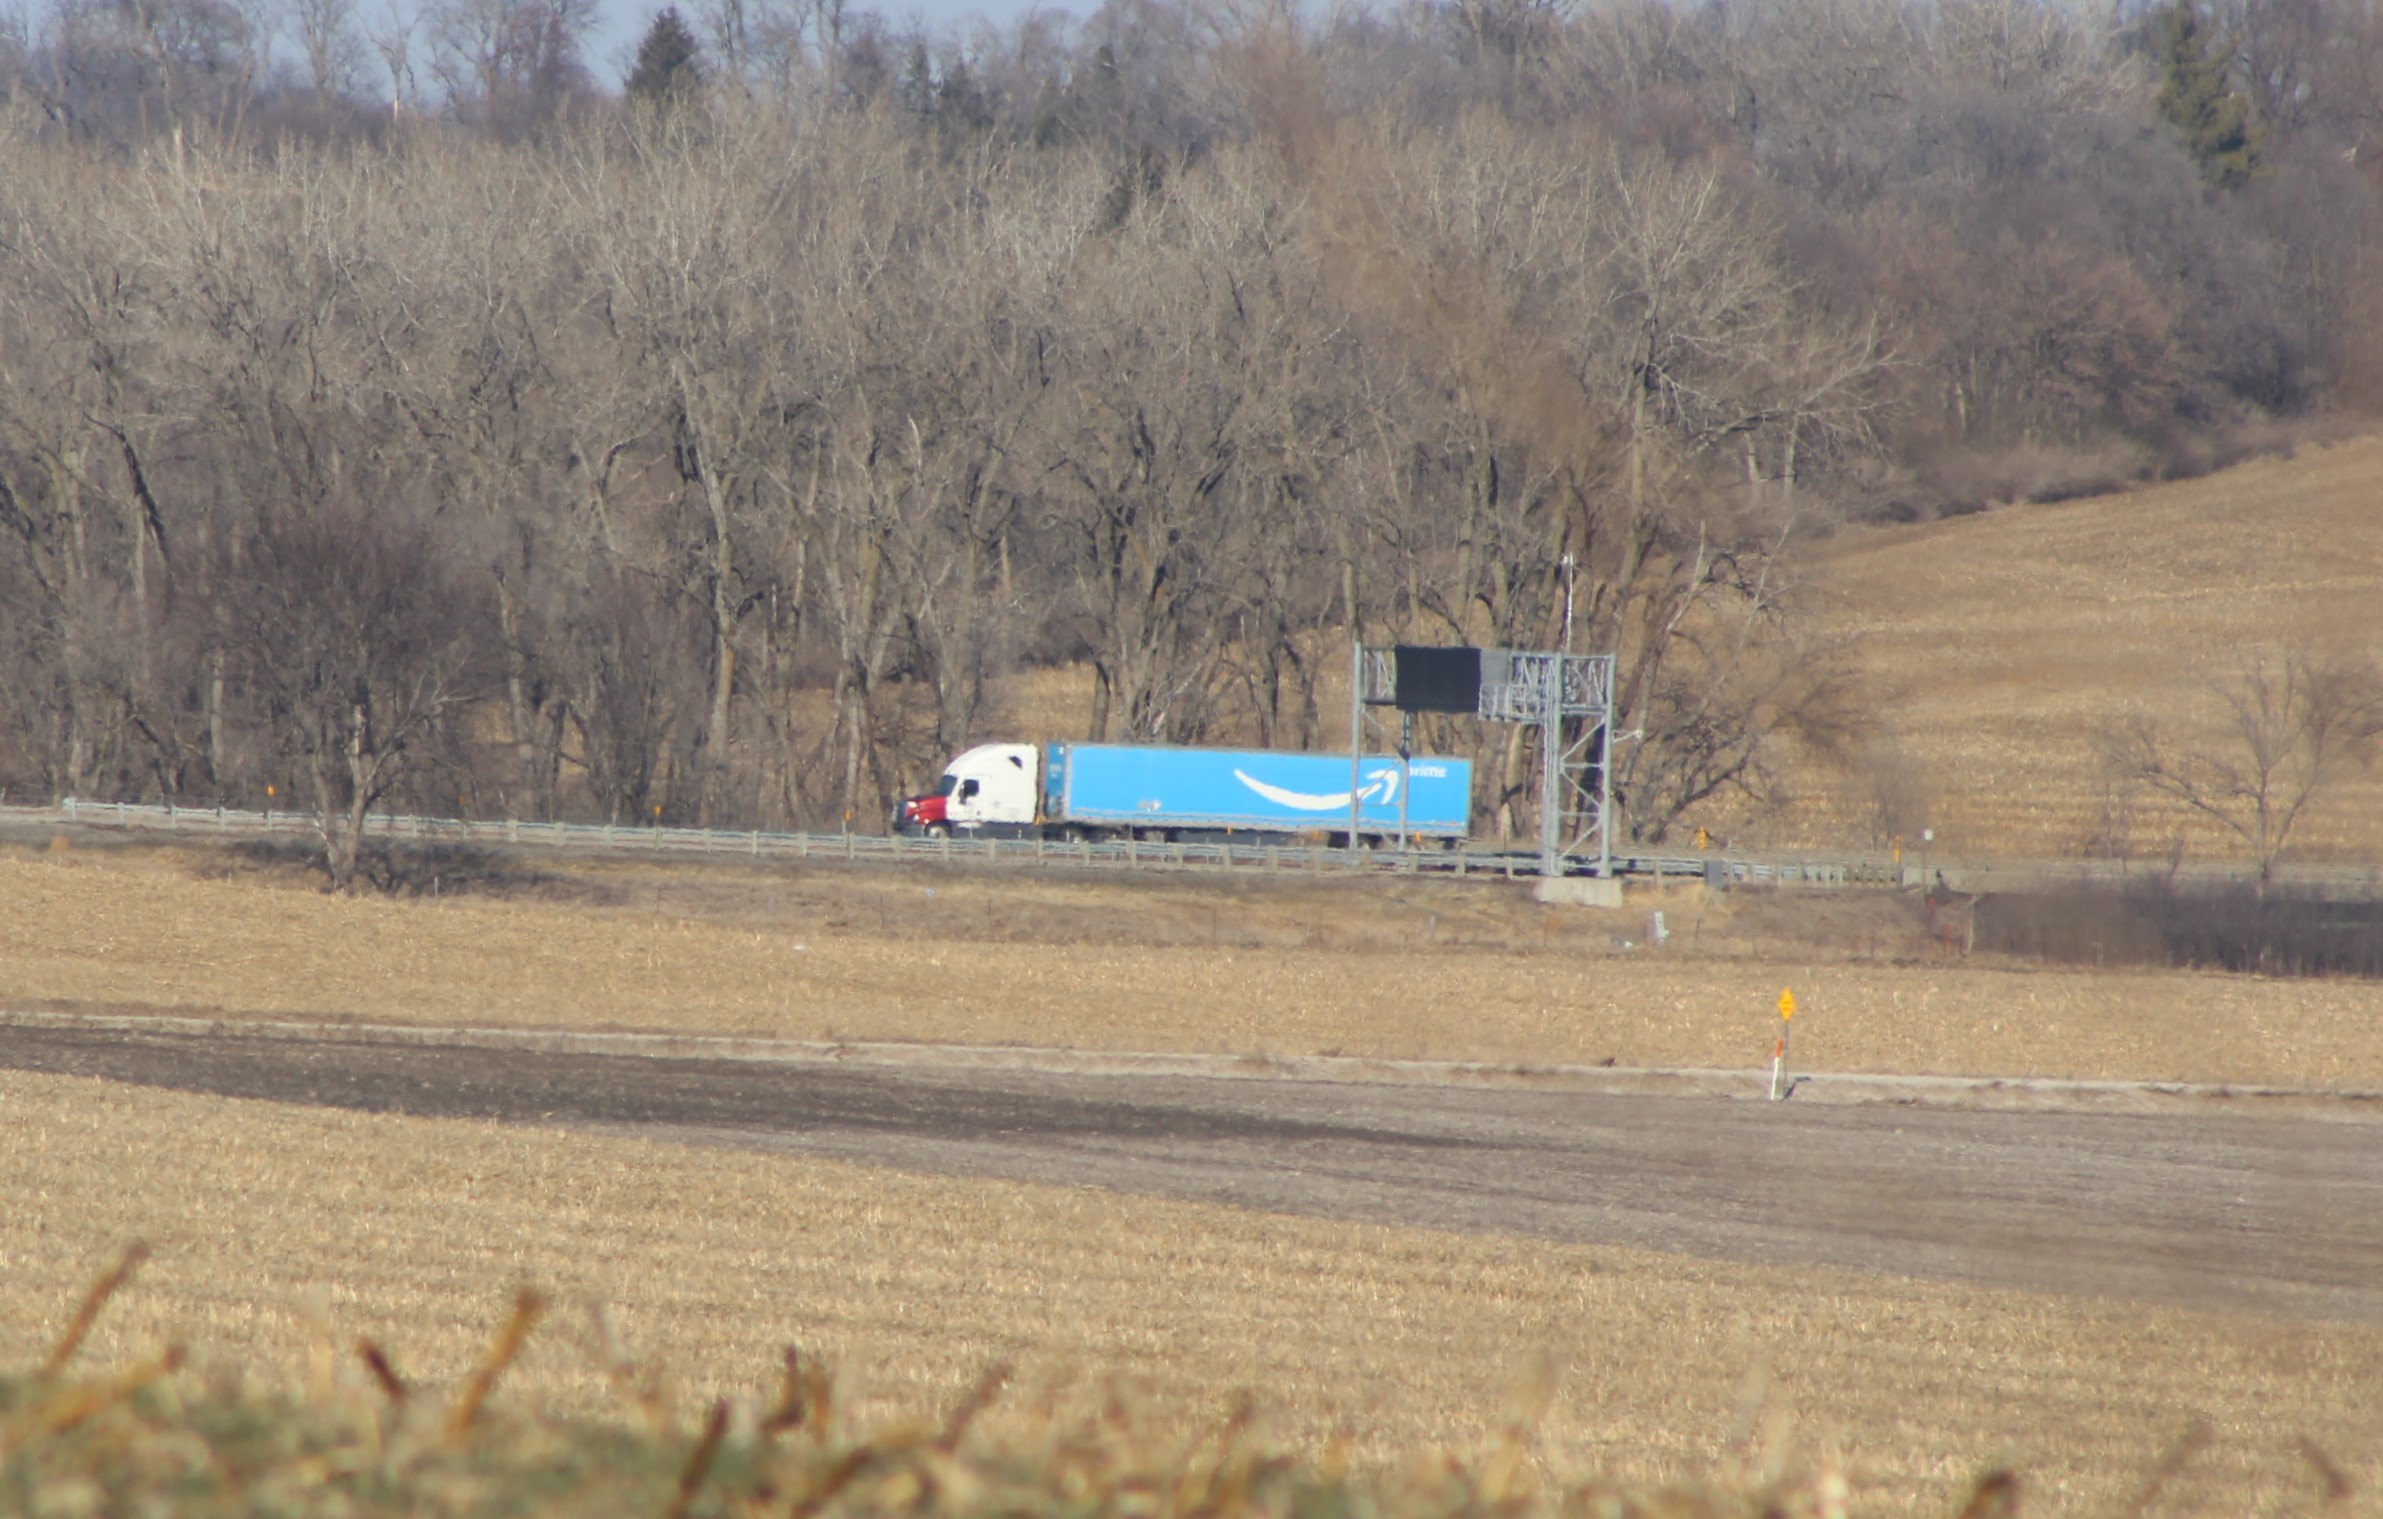 Interstate from the barn. A truck on I-80 sports the familiar Amazon Smile logo, seen from the hay mow of the barn on Owl Acres. A picture with reverse composition appears in the text.